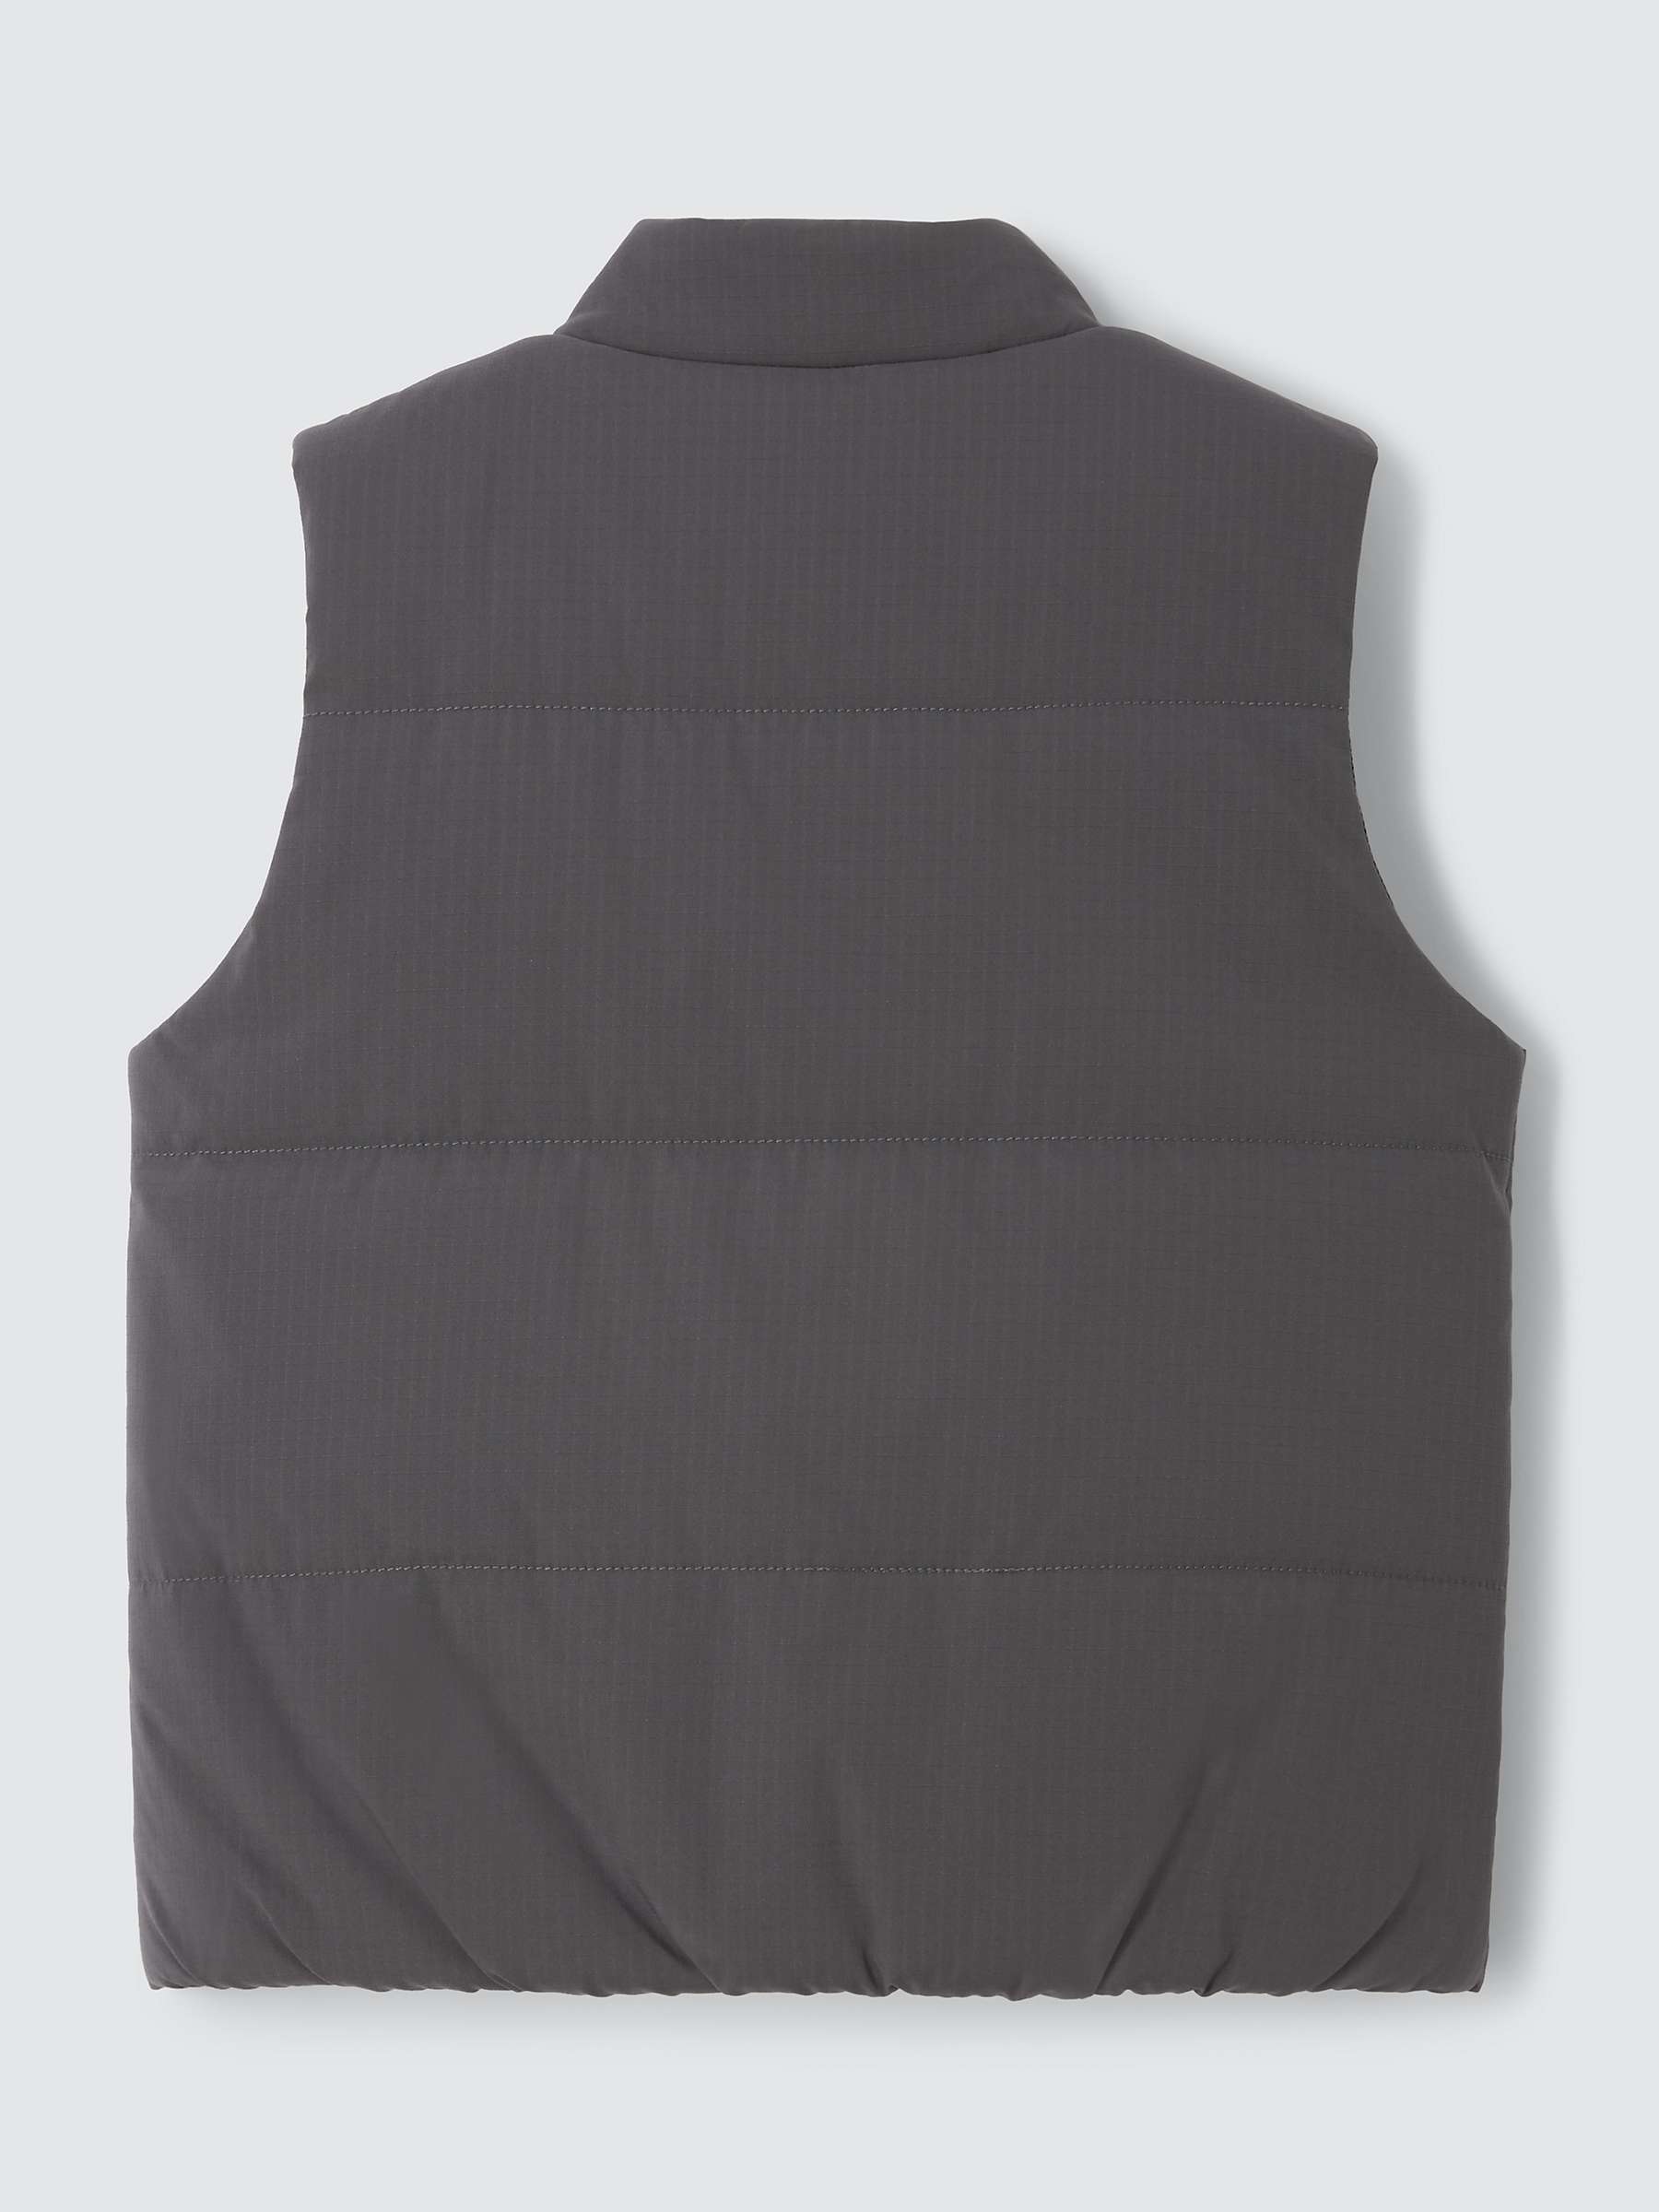 Buy John Lewis Kids' Quilted Shower Resistant Ripstop Gilet, Charcoal Online at johnlewis.com